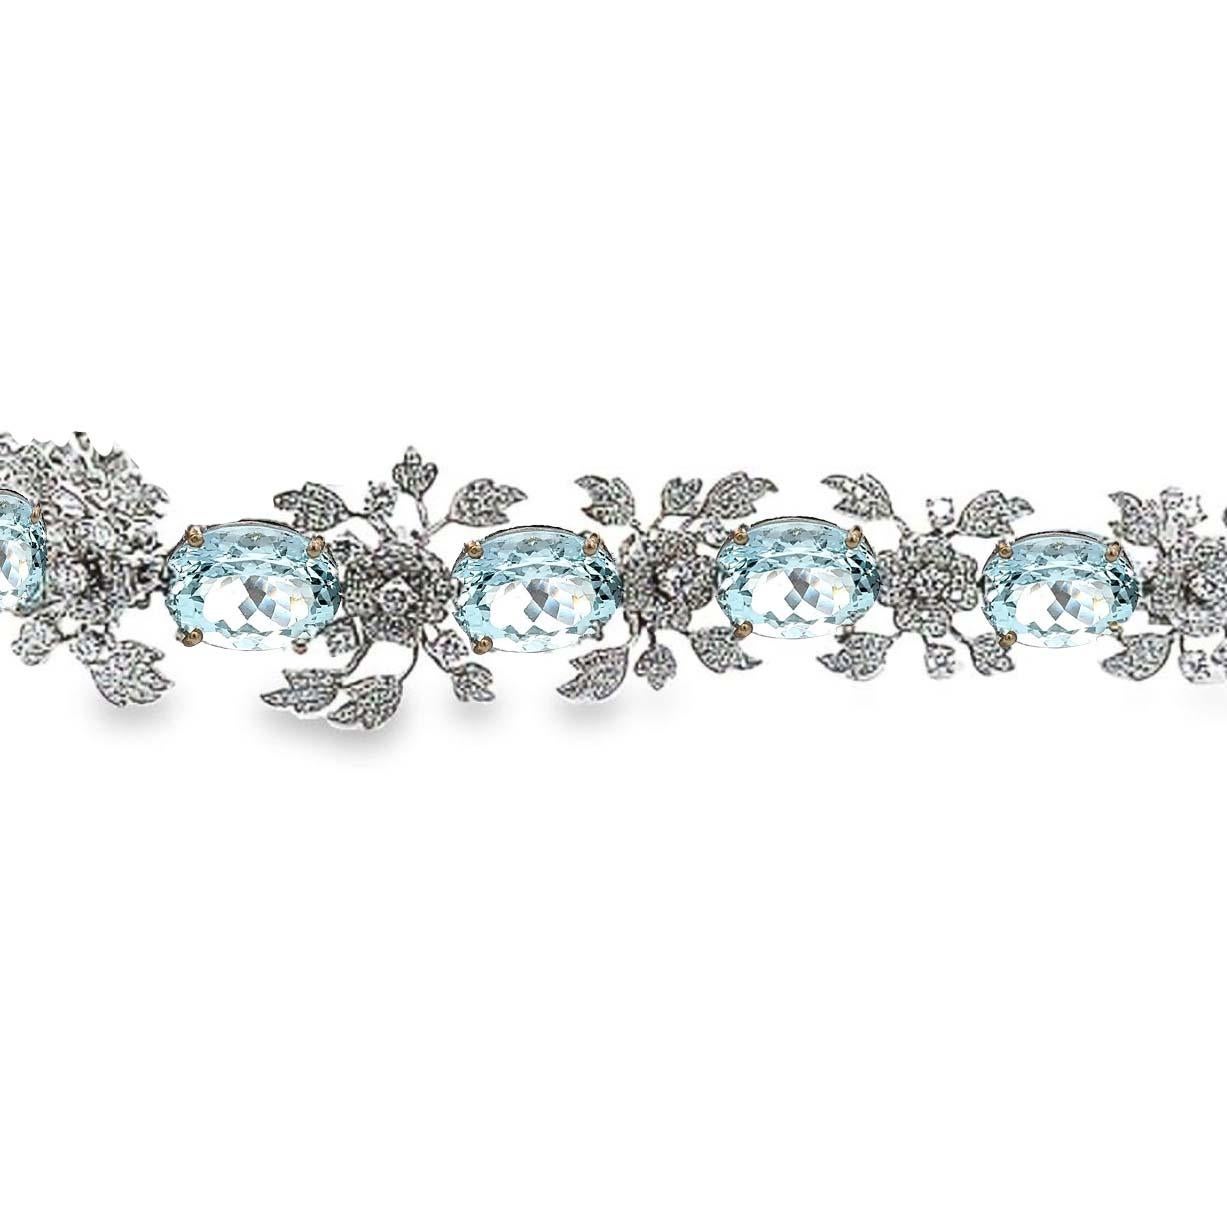 18K white gold Aquamarine and Diamond Bracelet: This exceptional piece features eight captivating bright blue oval aquamarine gemstones, totaling approximately 50 carats. 
Accentuating the beauty of these aquamarines are round brilliant diamonds